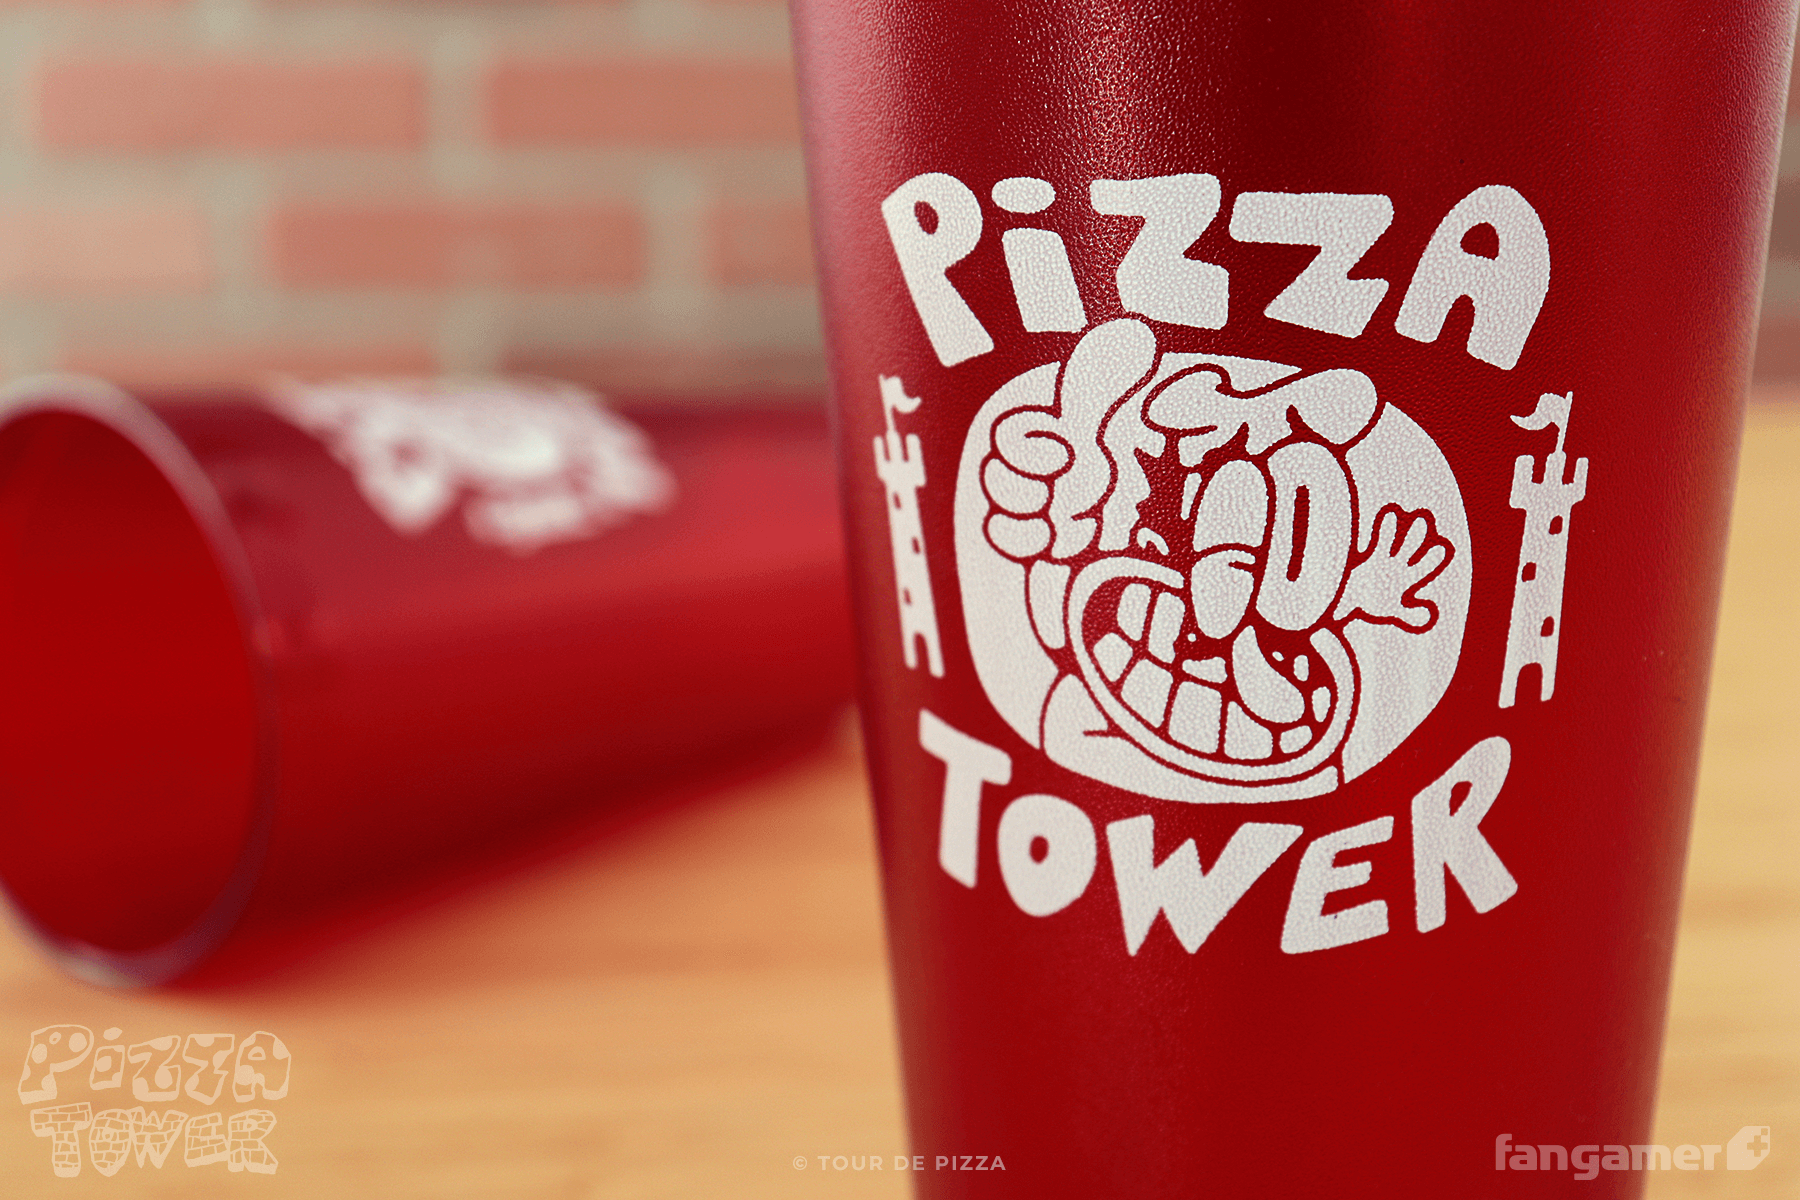 Pizza Tower - Pizza Tower - Fangamer